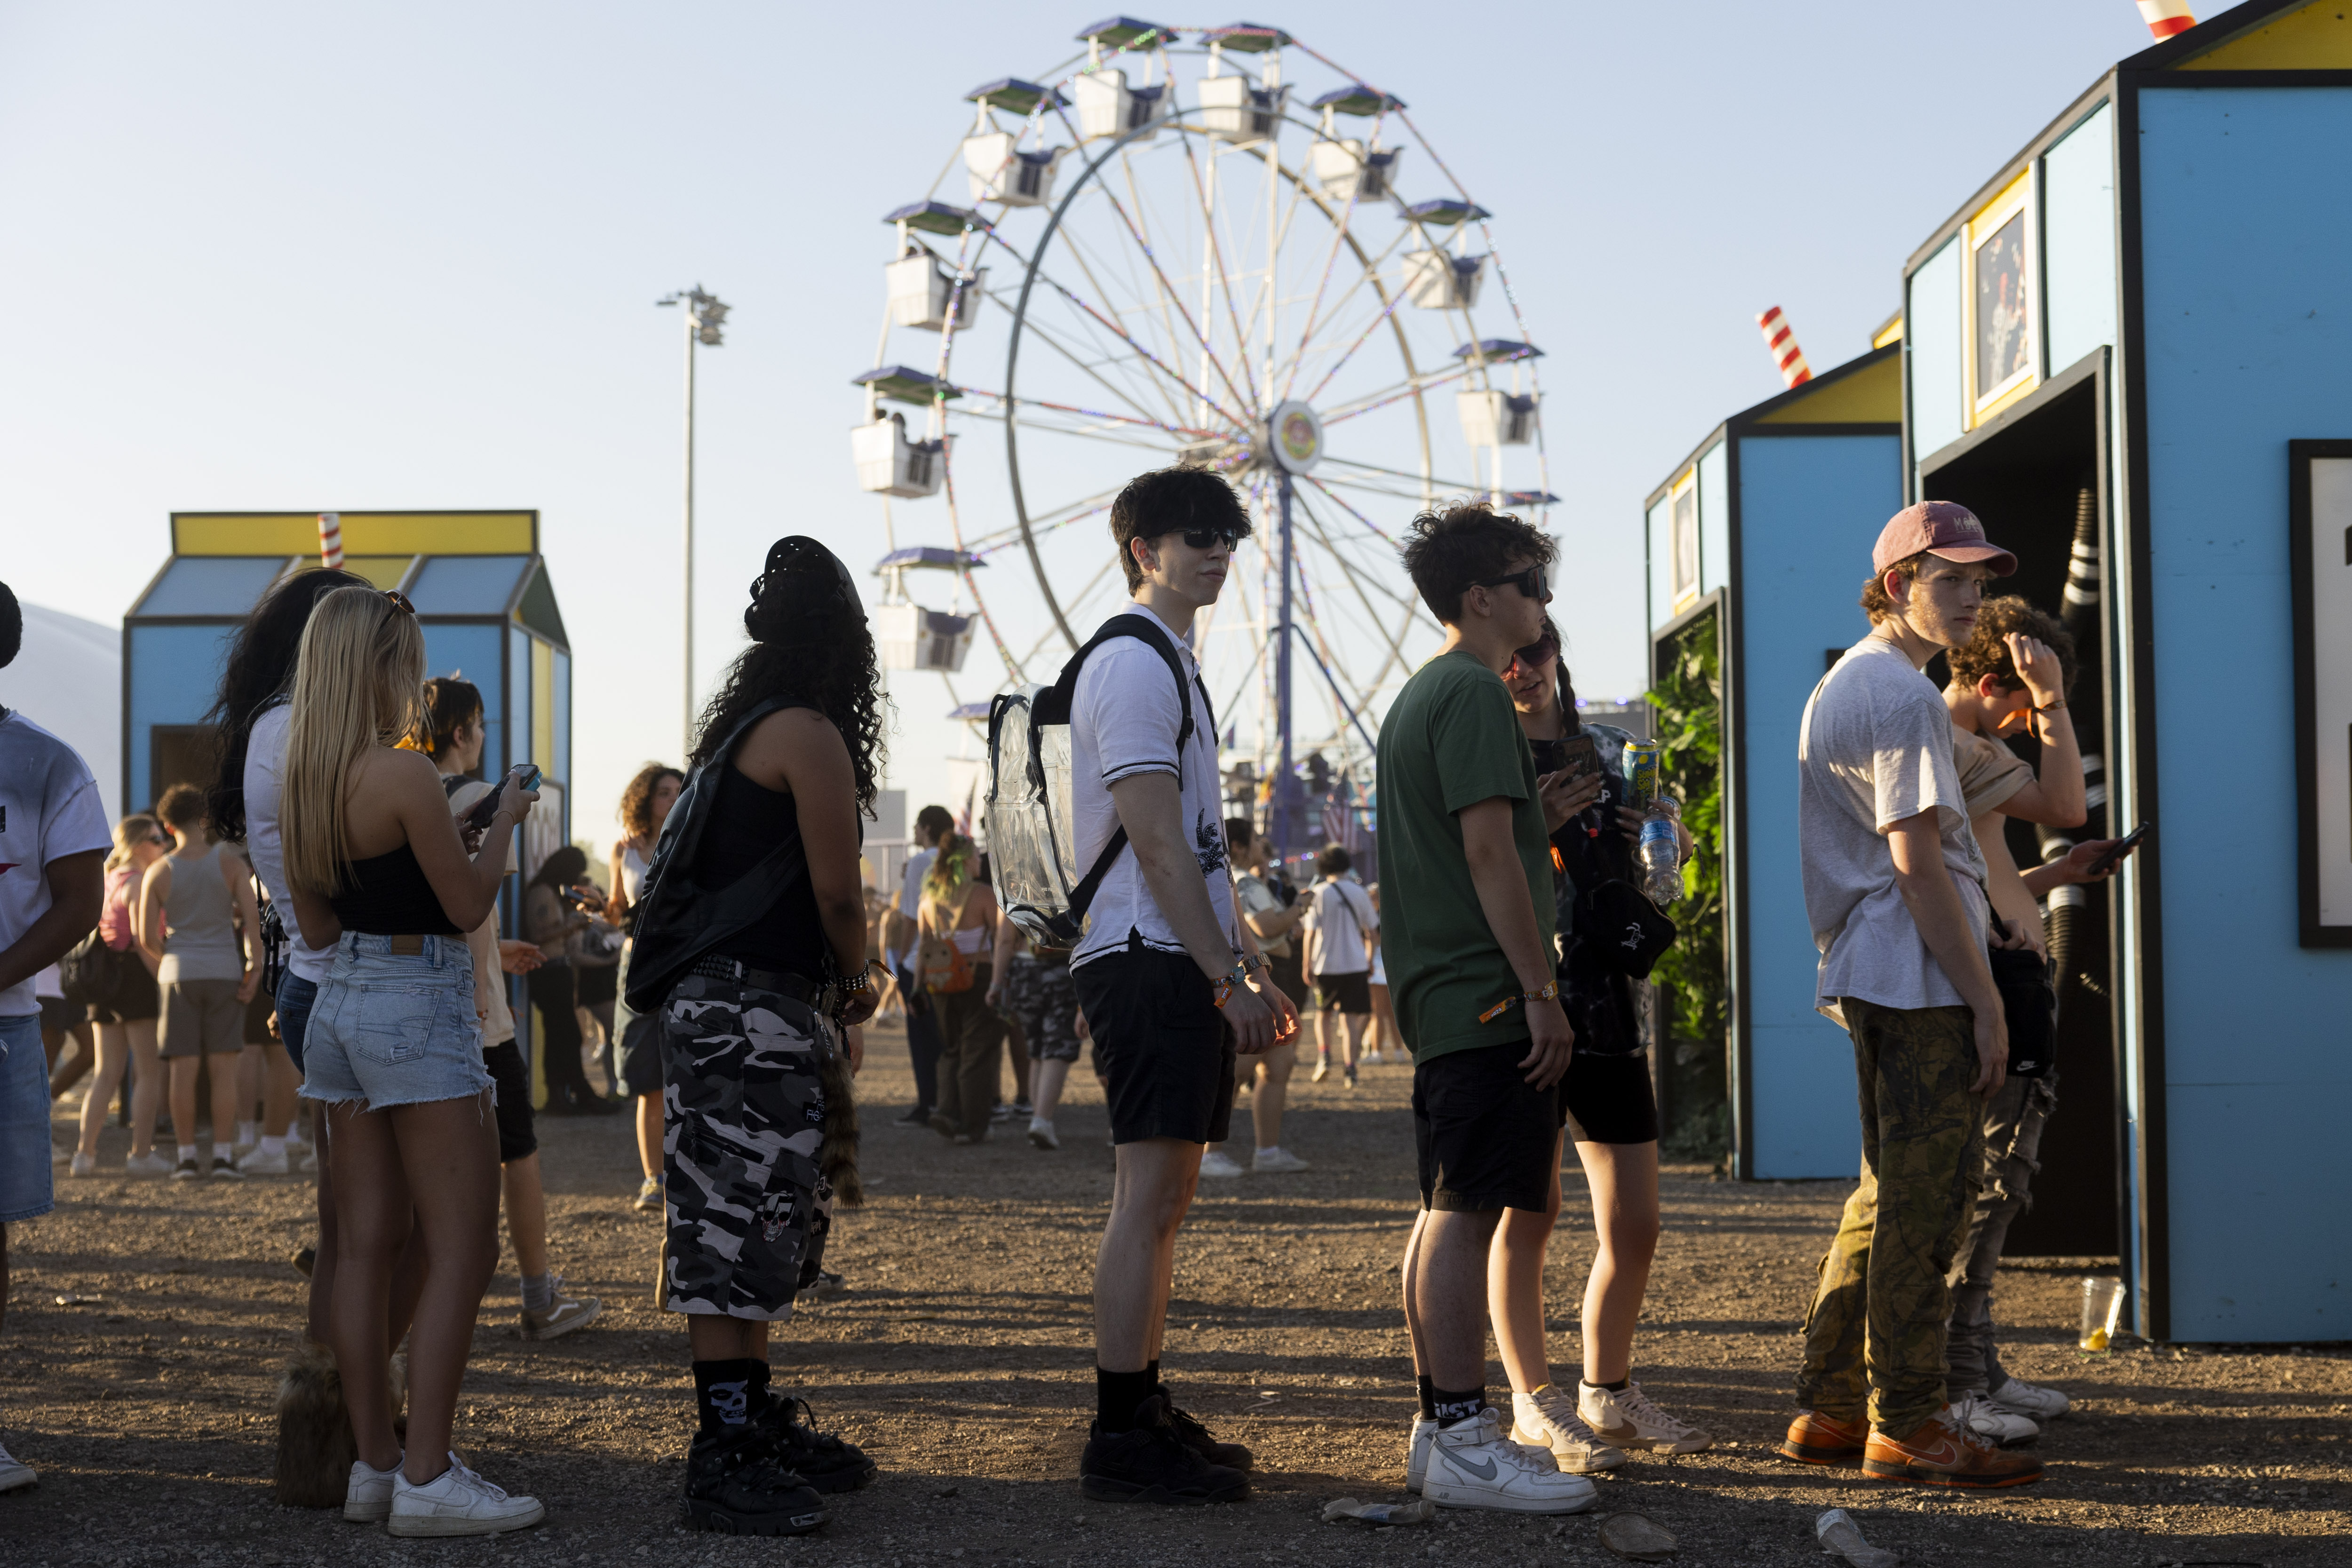 Festival goers wait in line to take photos in a...